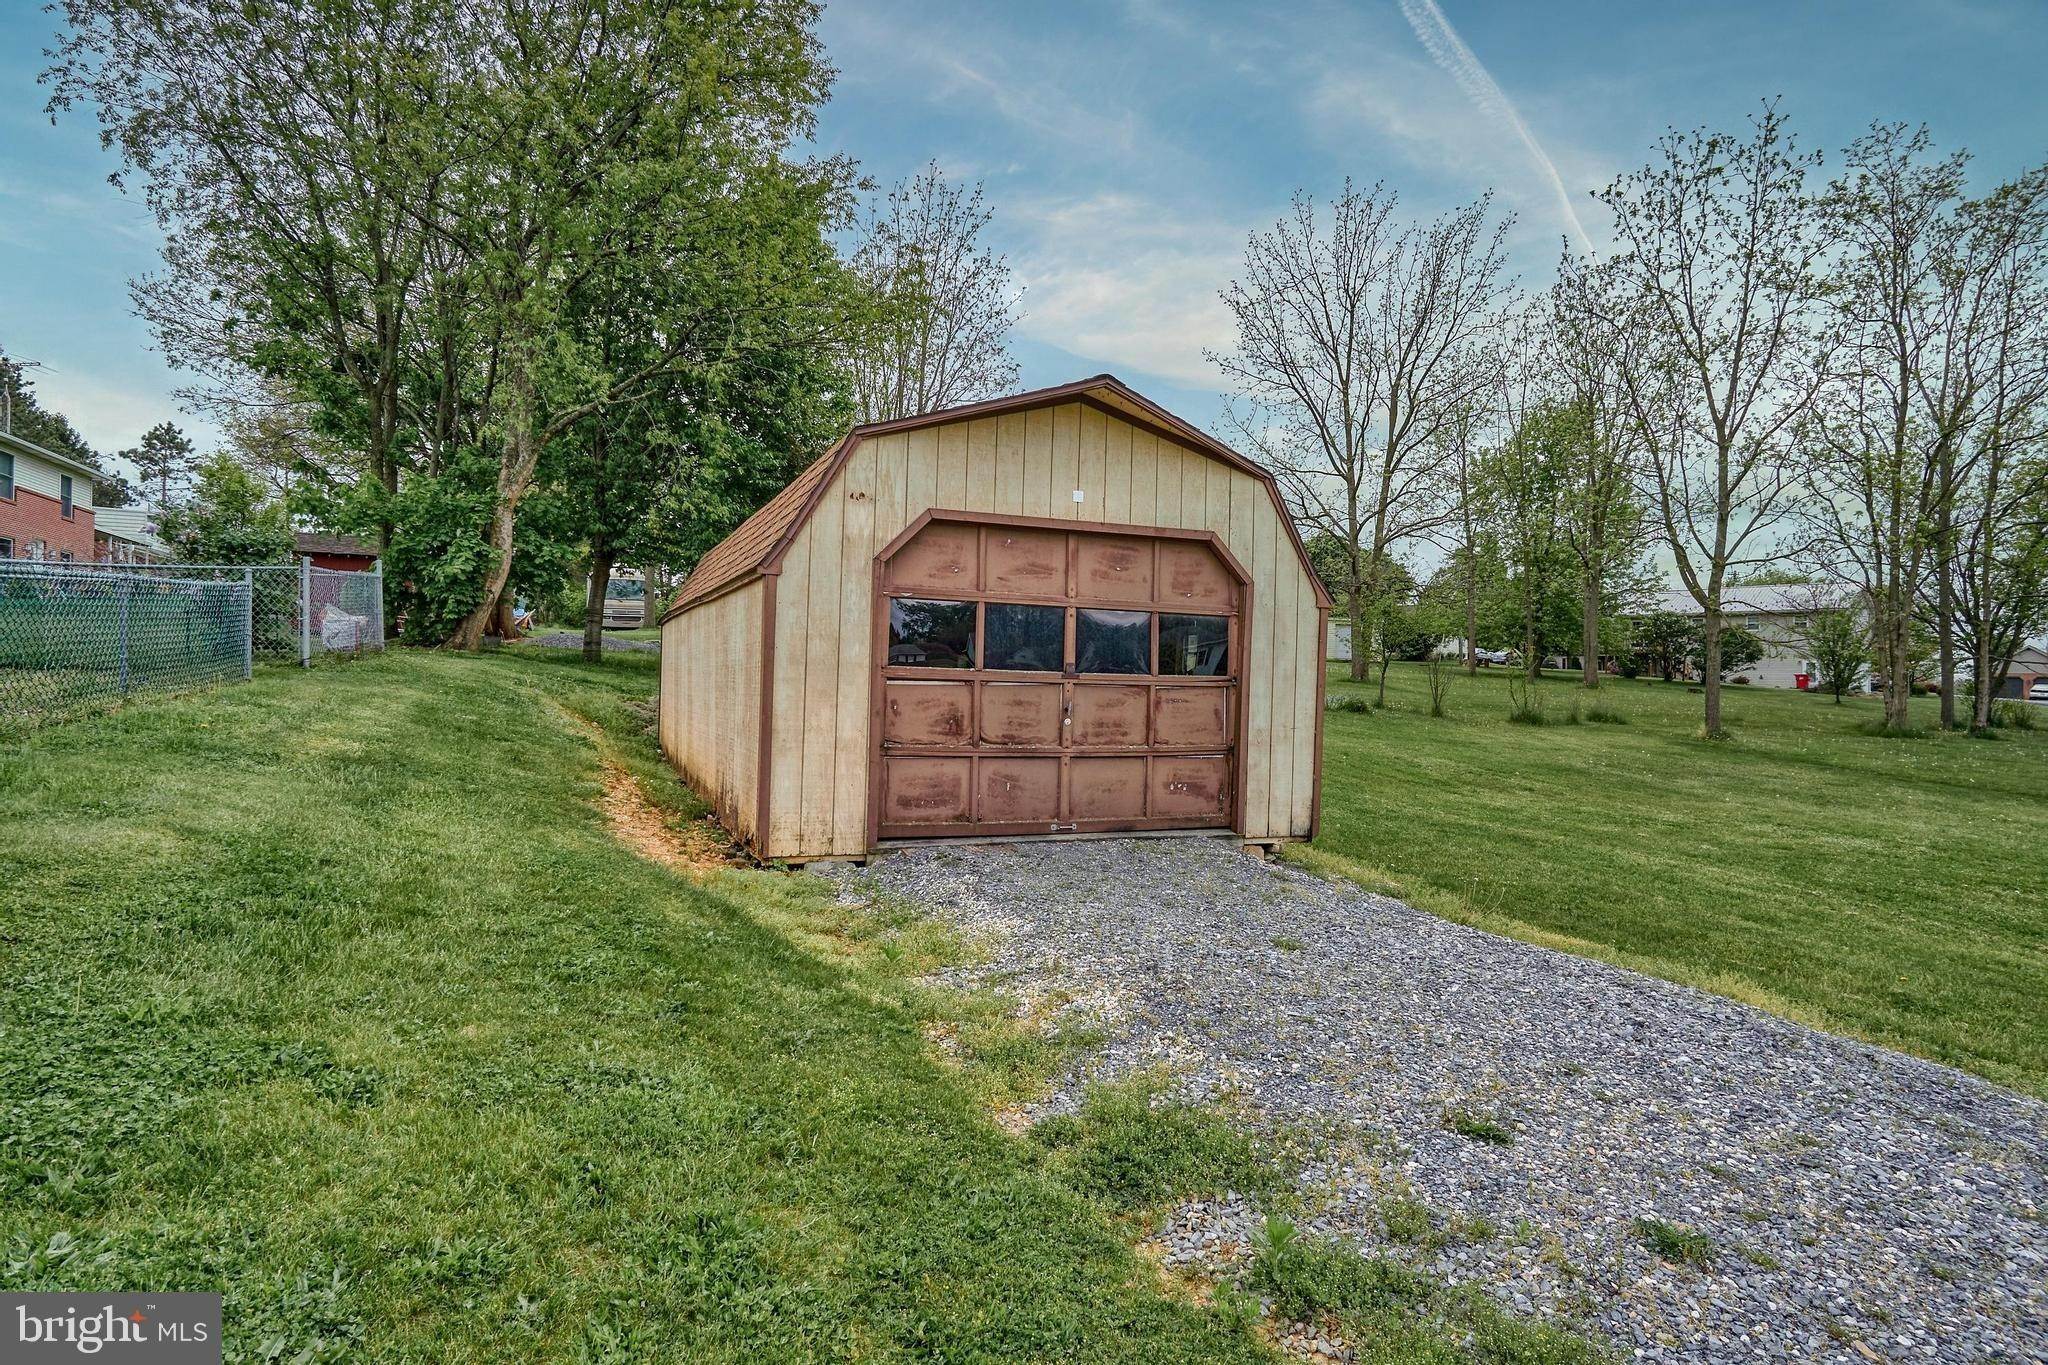 7. Land for Sale at Fayetteville, PA 17222